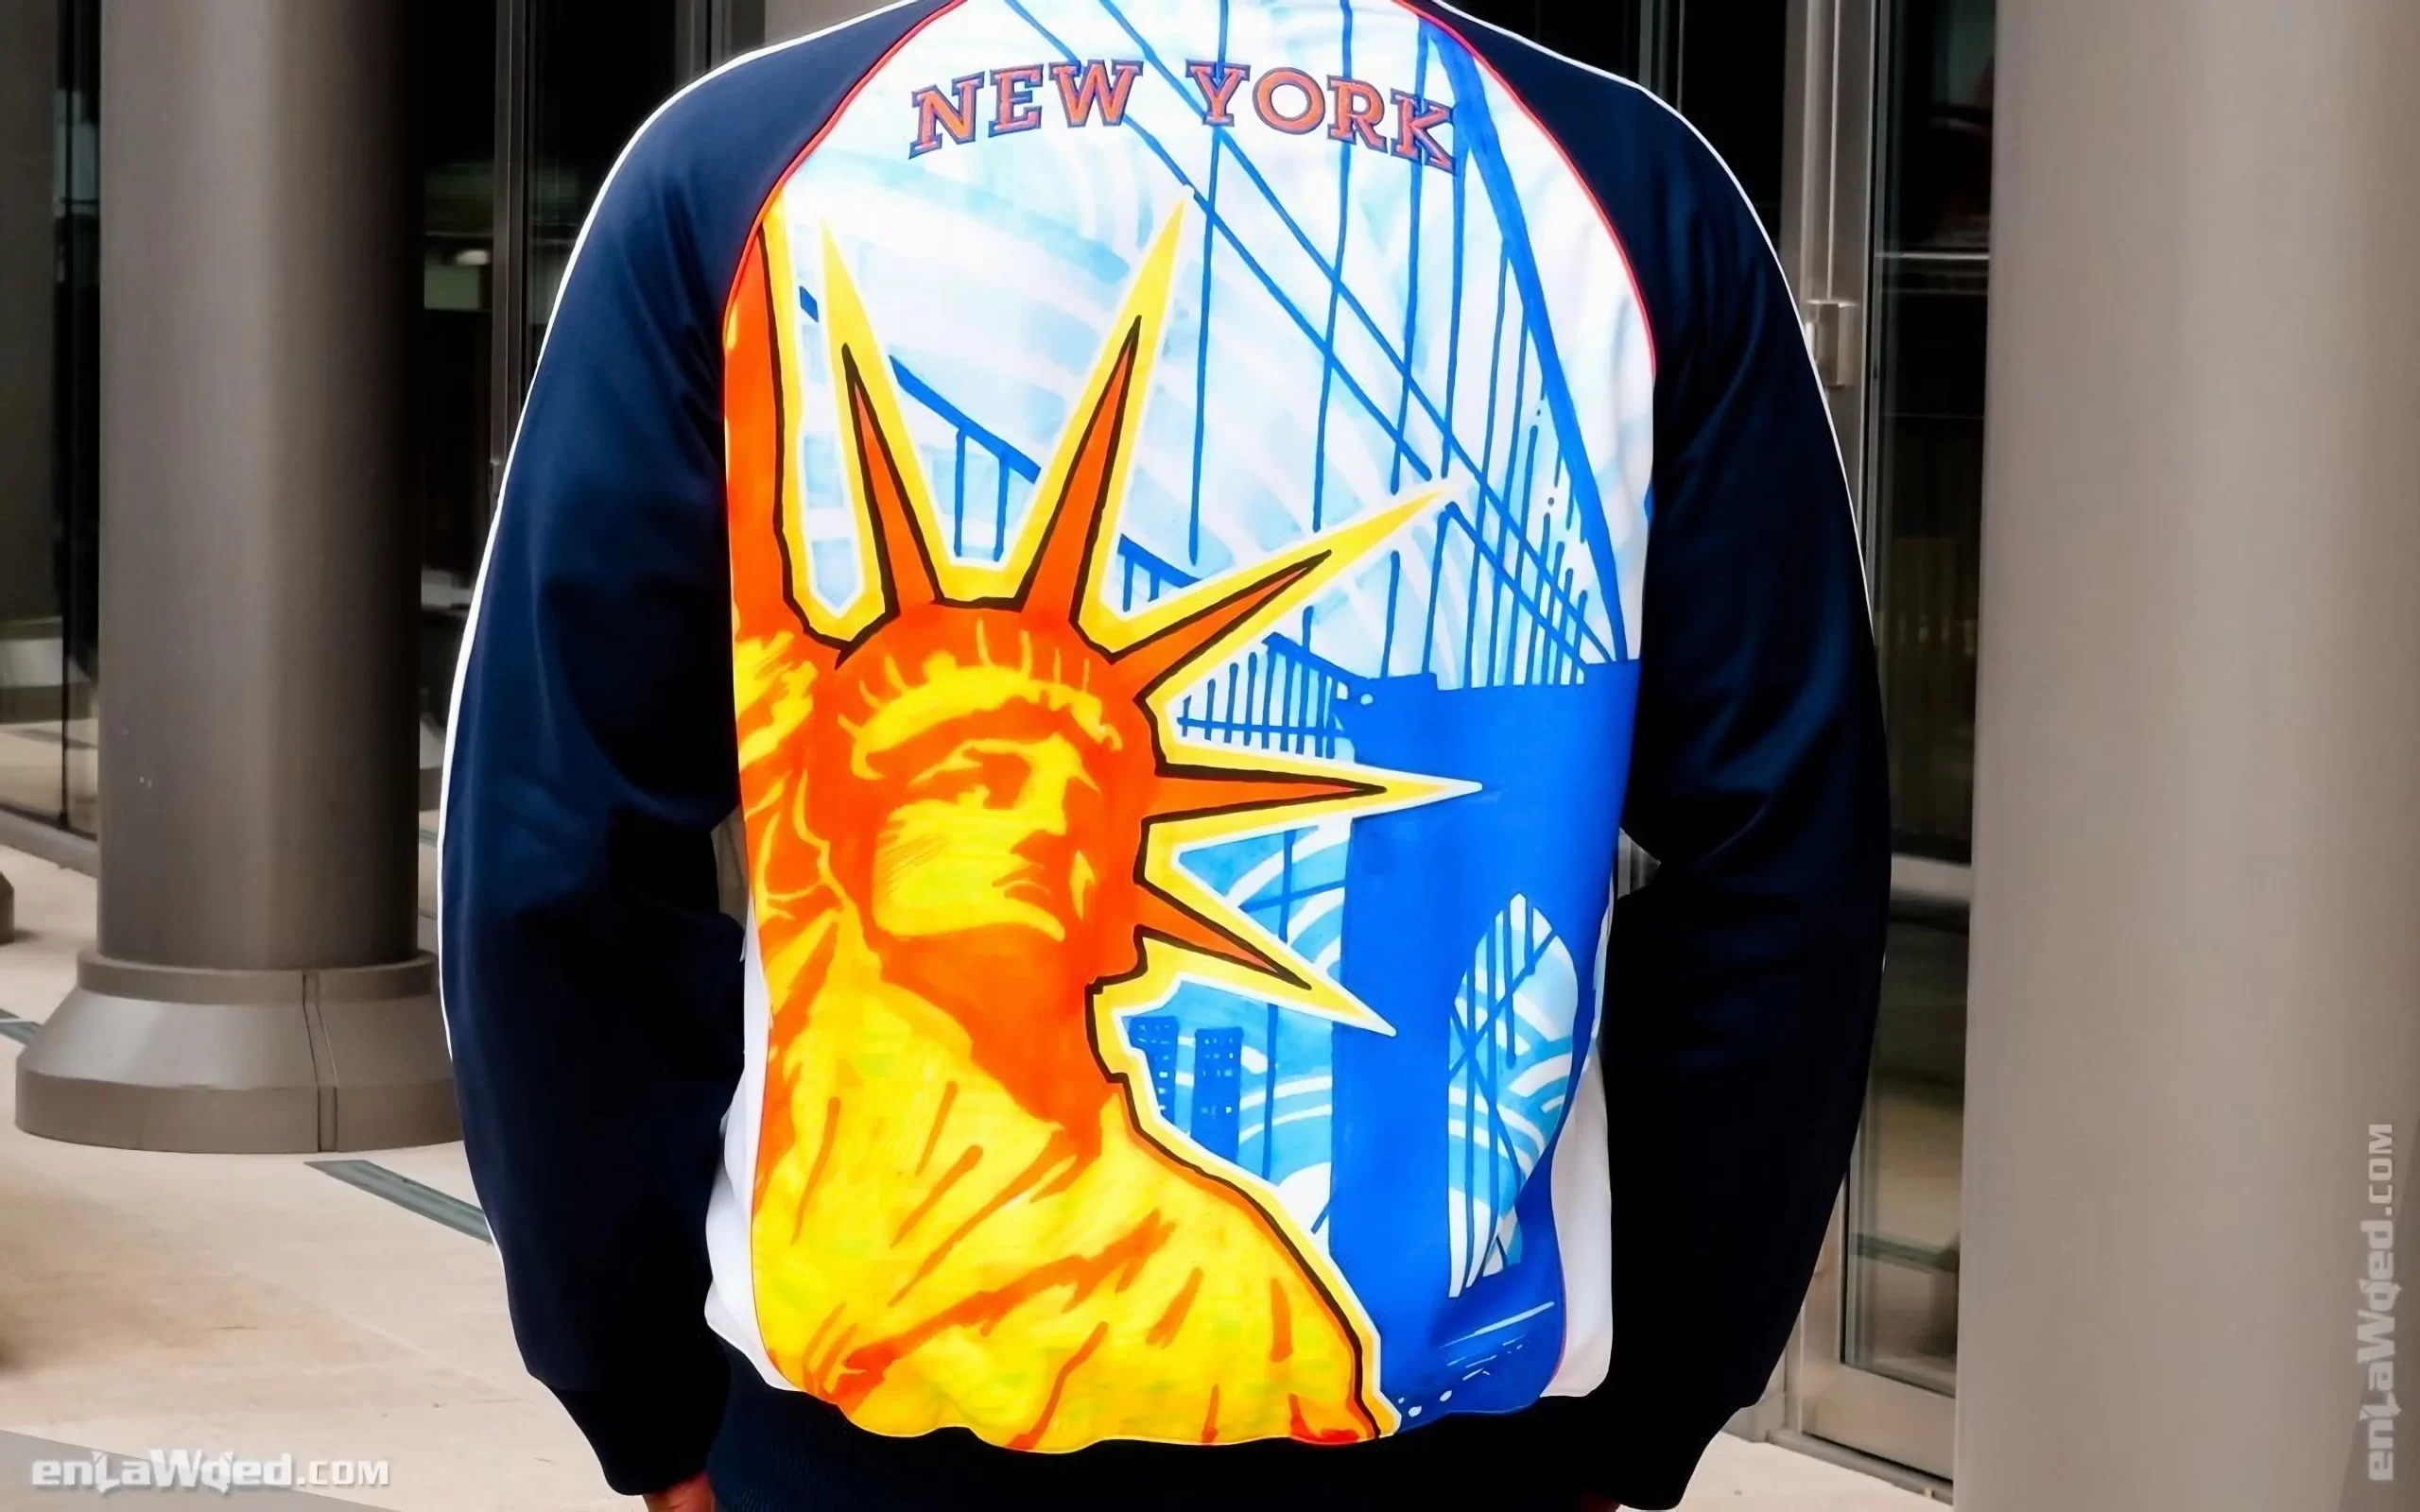 Men’s 2006 New York City Track Top by Adidas Originals: Backed (EnLawded.com file #lmchk90409ip2y123199kg9st)